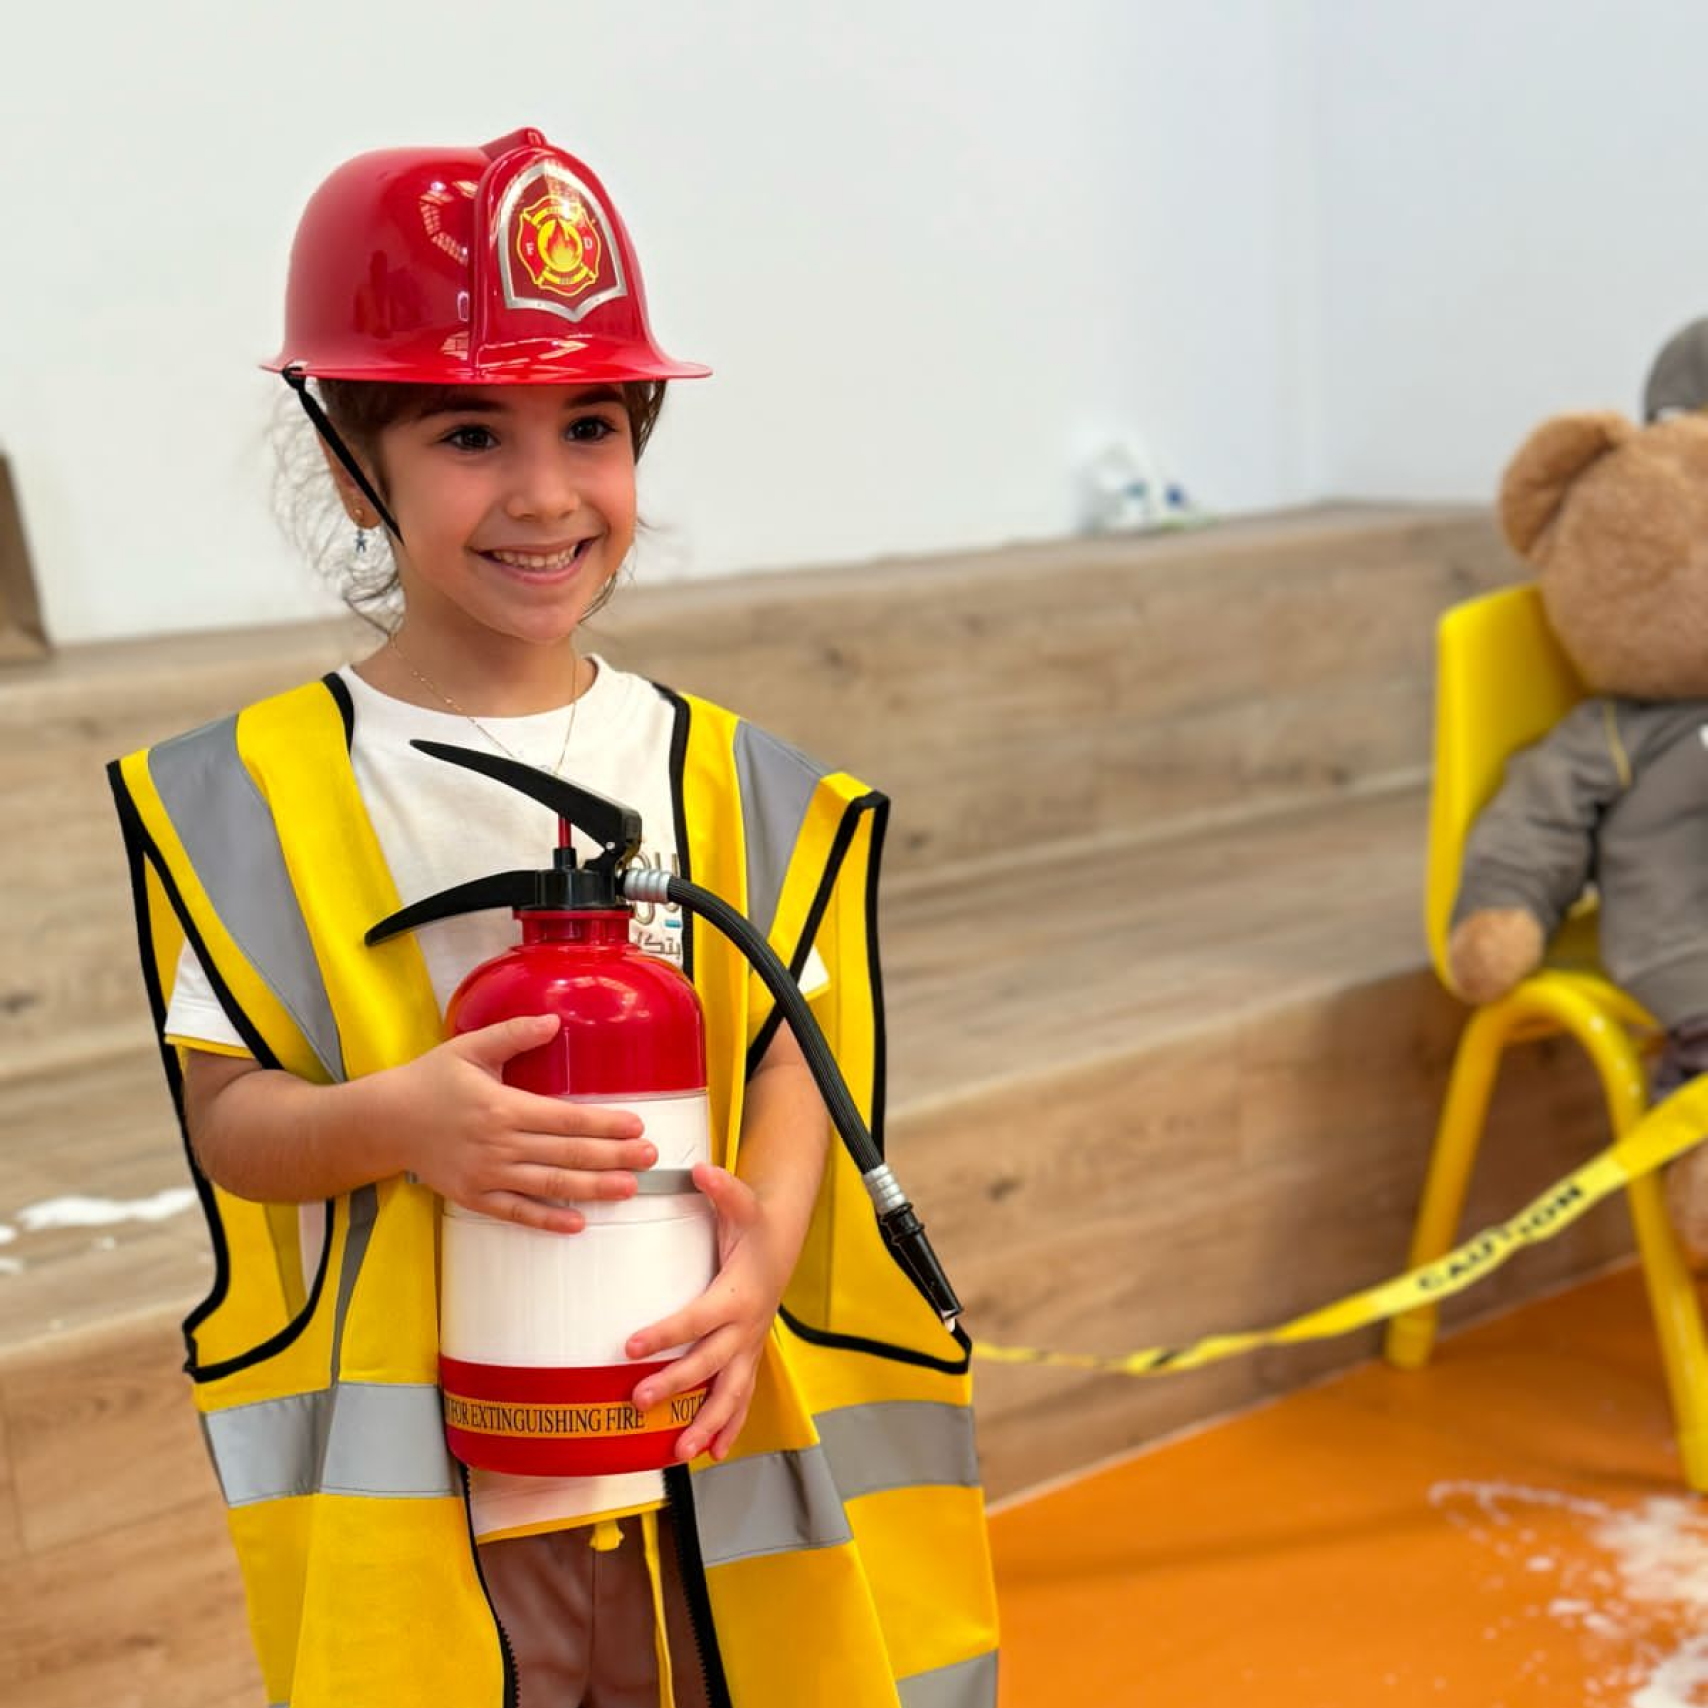 A little girl dressed as a fireman holding a fire extinguisher